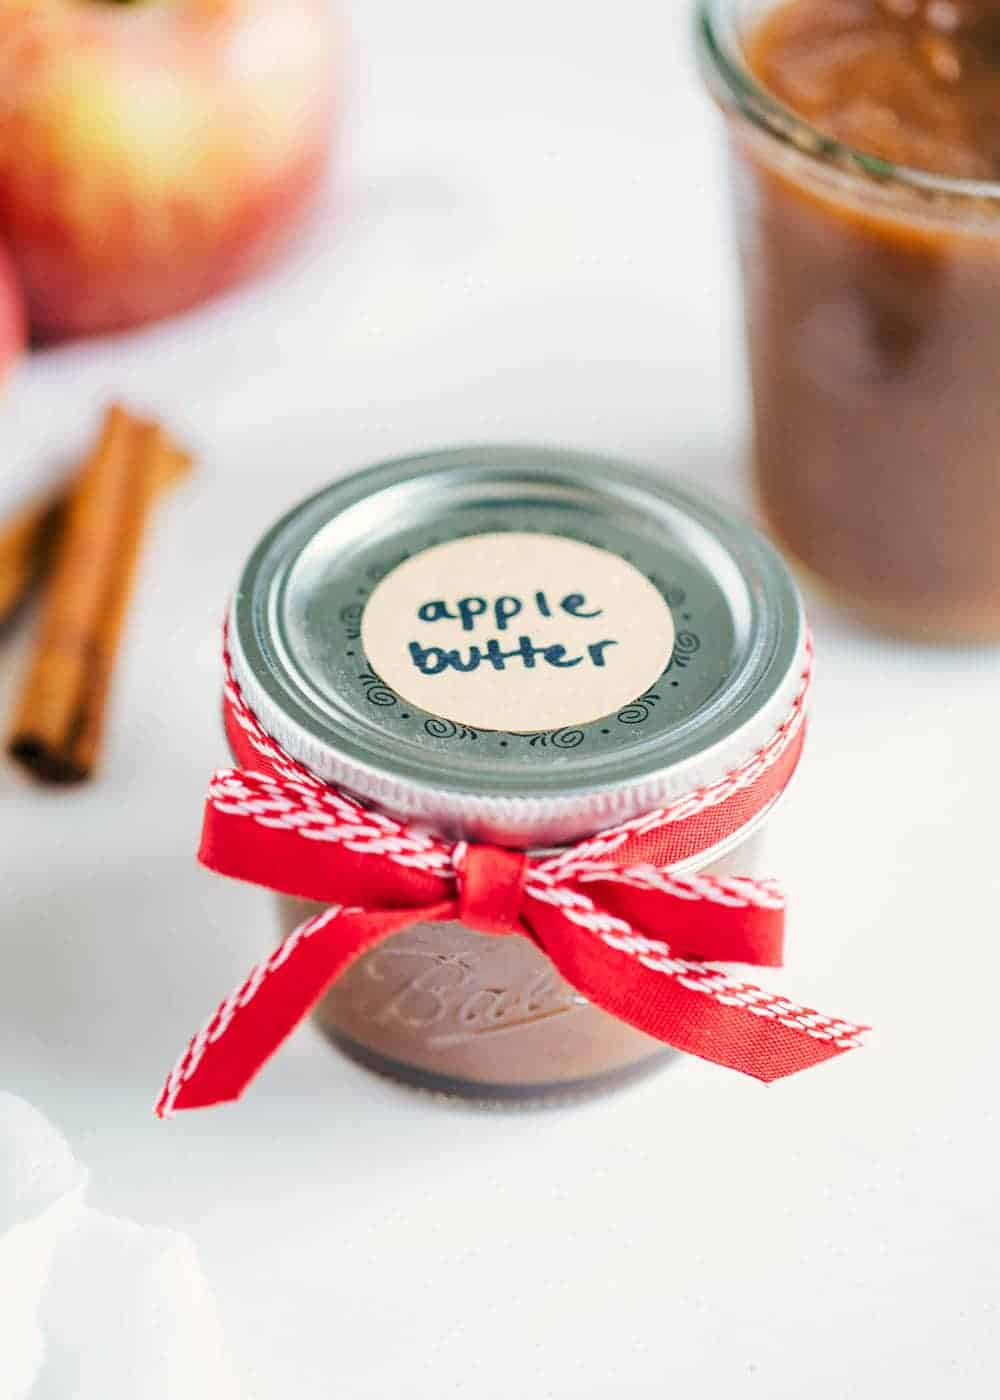 Apple butter in small jar with label and ribbon.